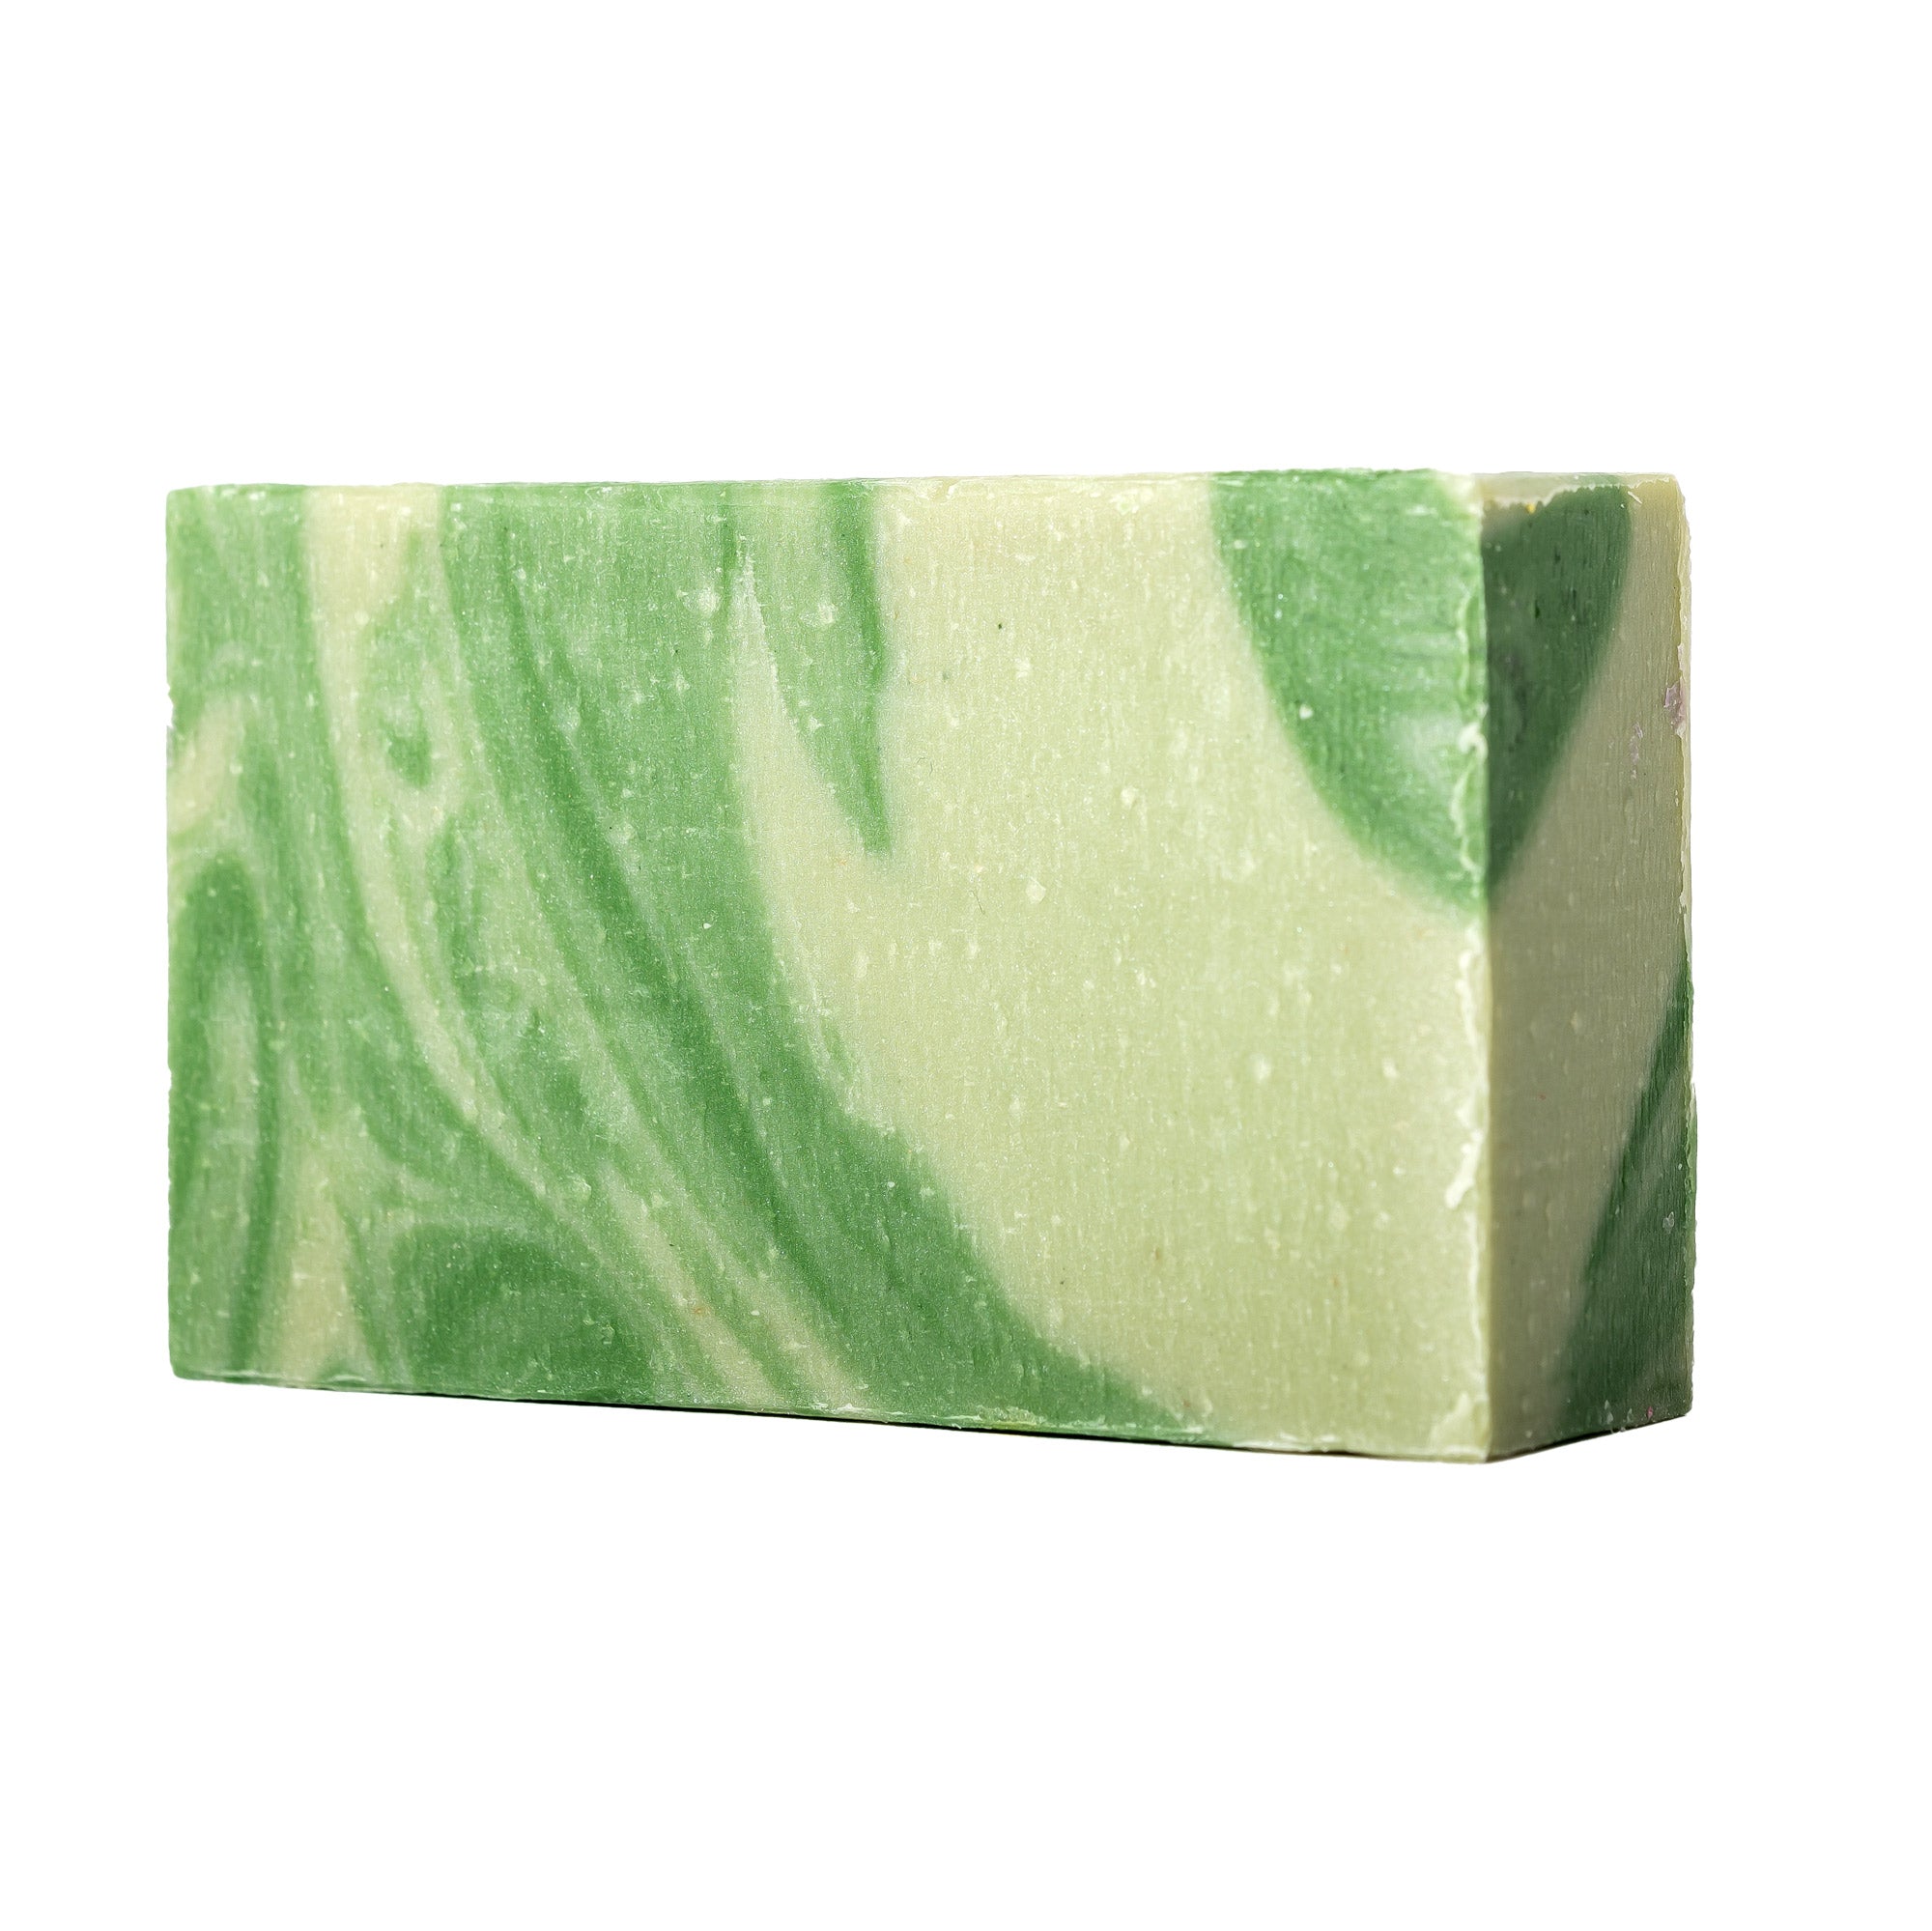 Coconut Milk Soap Counter Display with fill